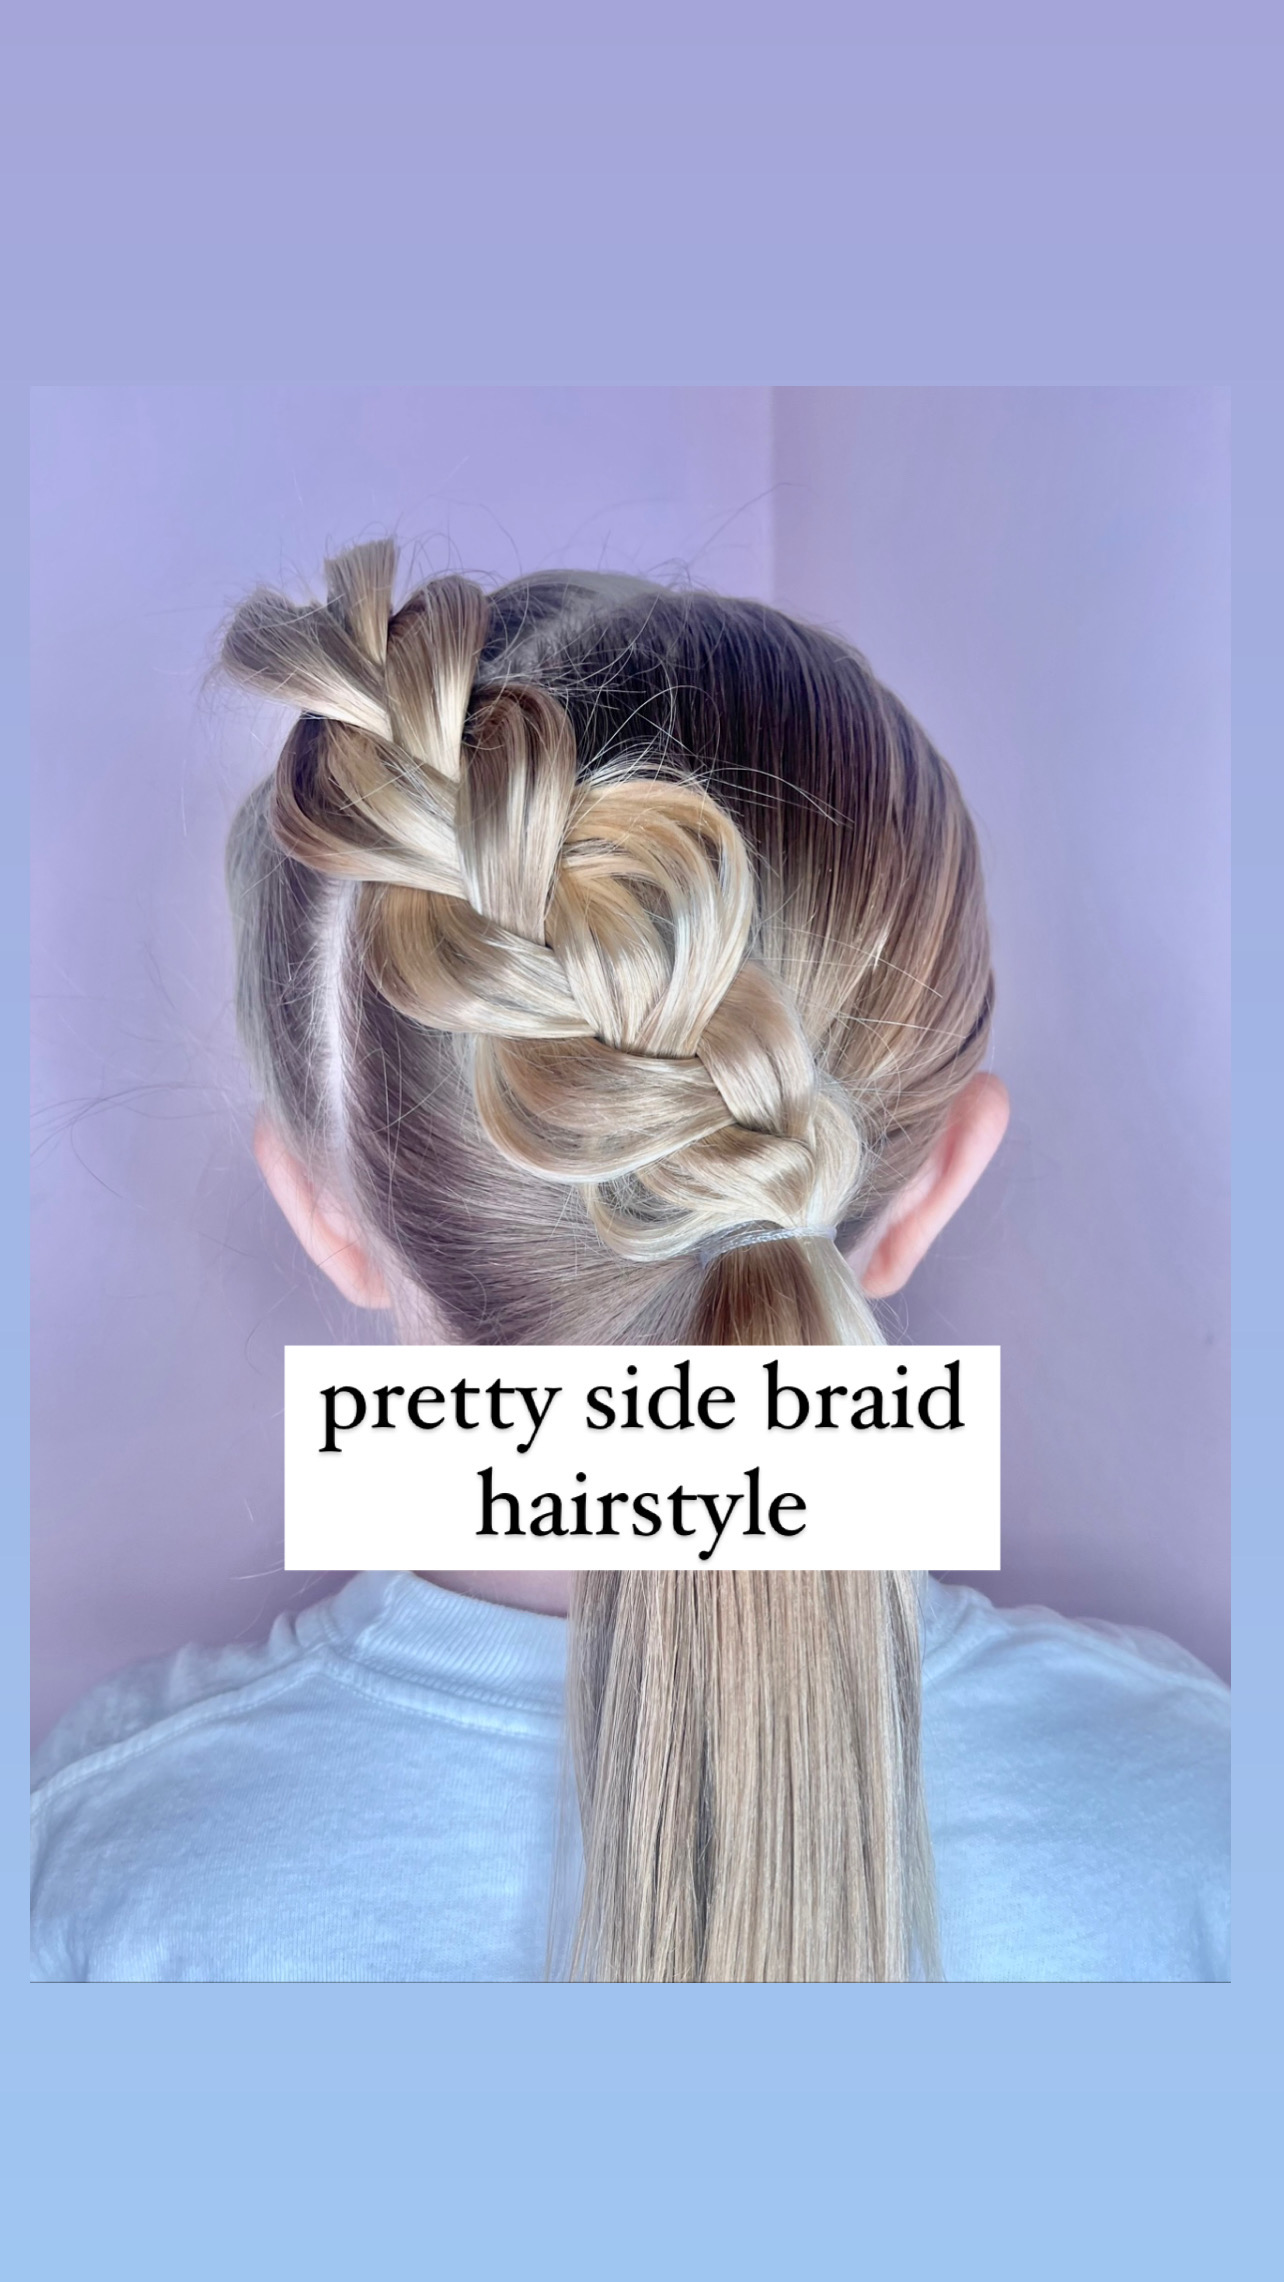 Quick and Easy Side Braid Hairstyles From Pinterest  StyleCaster